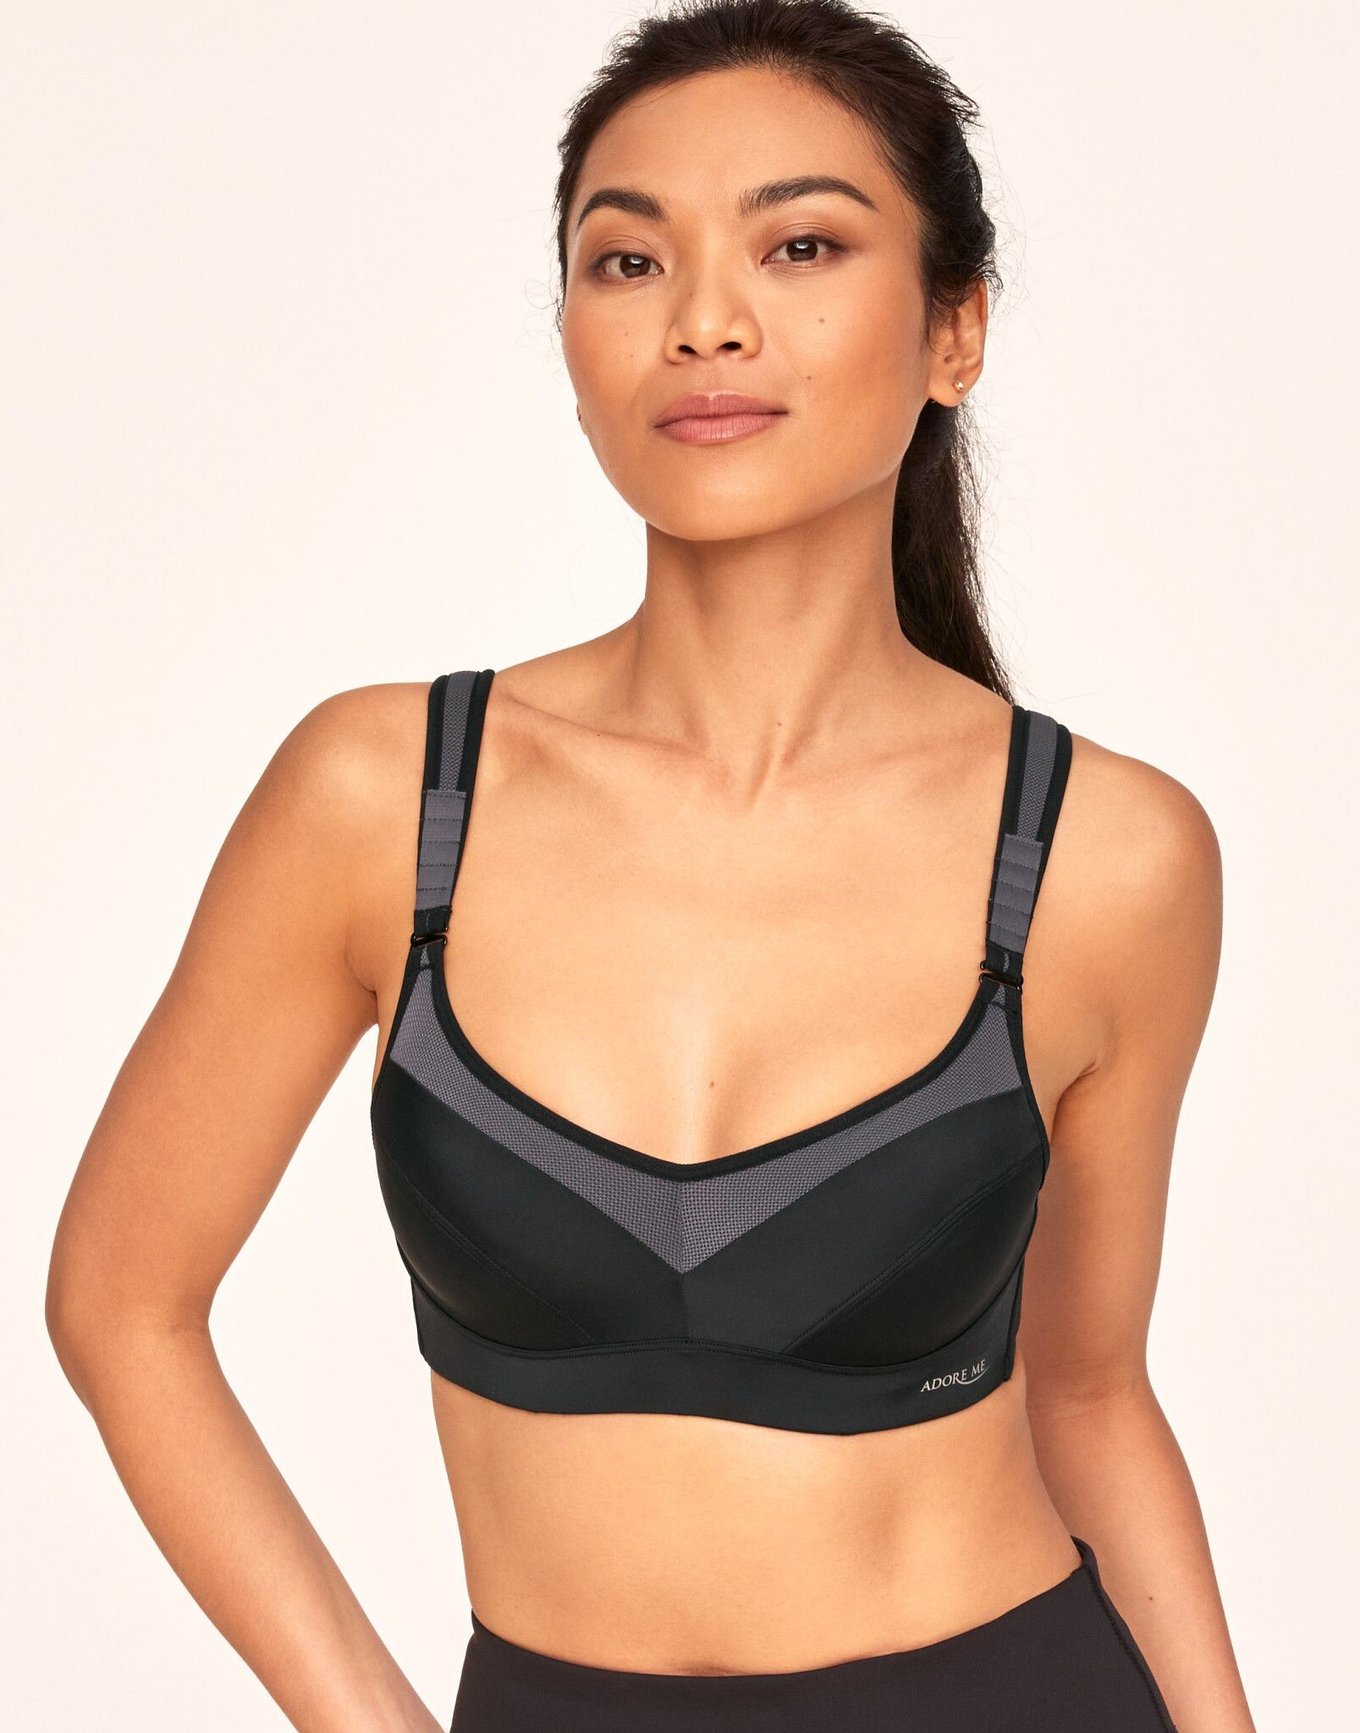 Front Cross Over Black Sports Bra – Medium Support – Thick